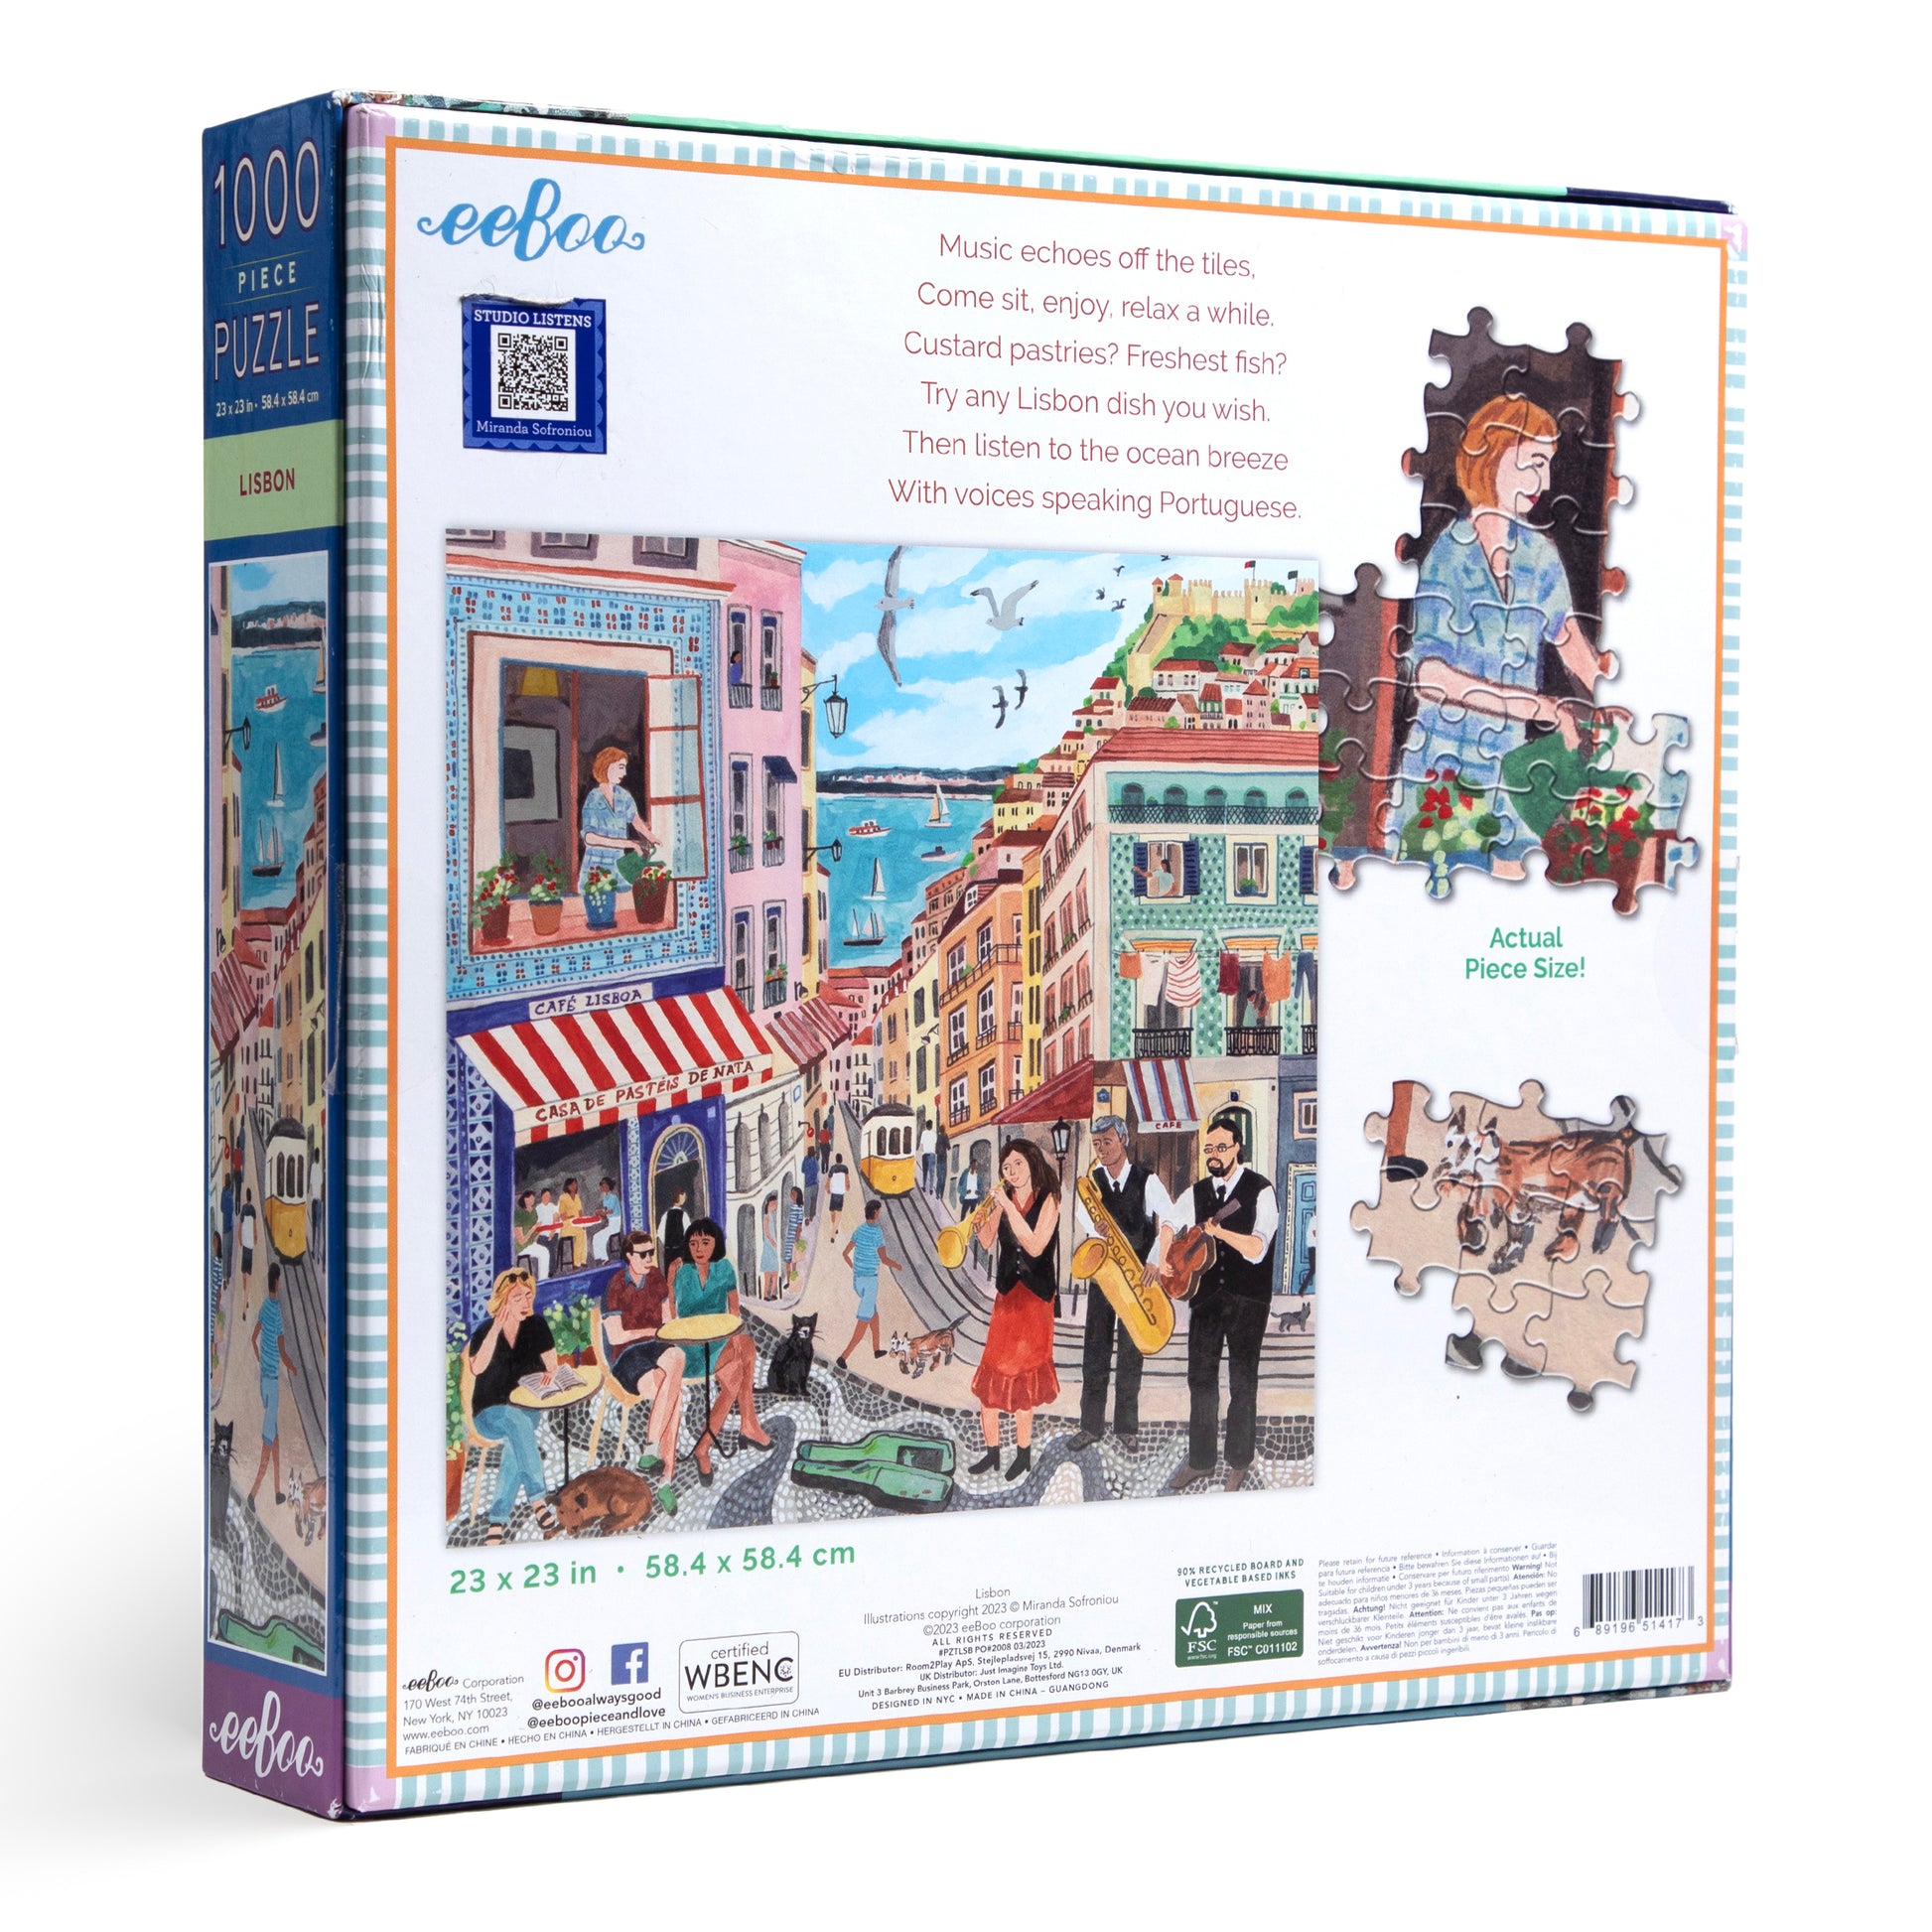 Lisbon Portugal 1000 Piece Jigsaw Puzzle | eeBoo Piece & Love Unique Gifts for Adults